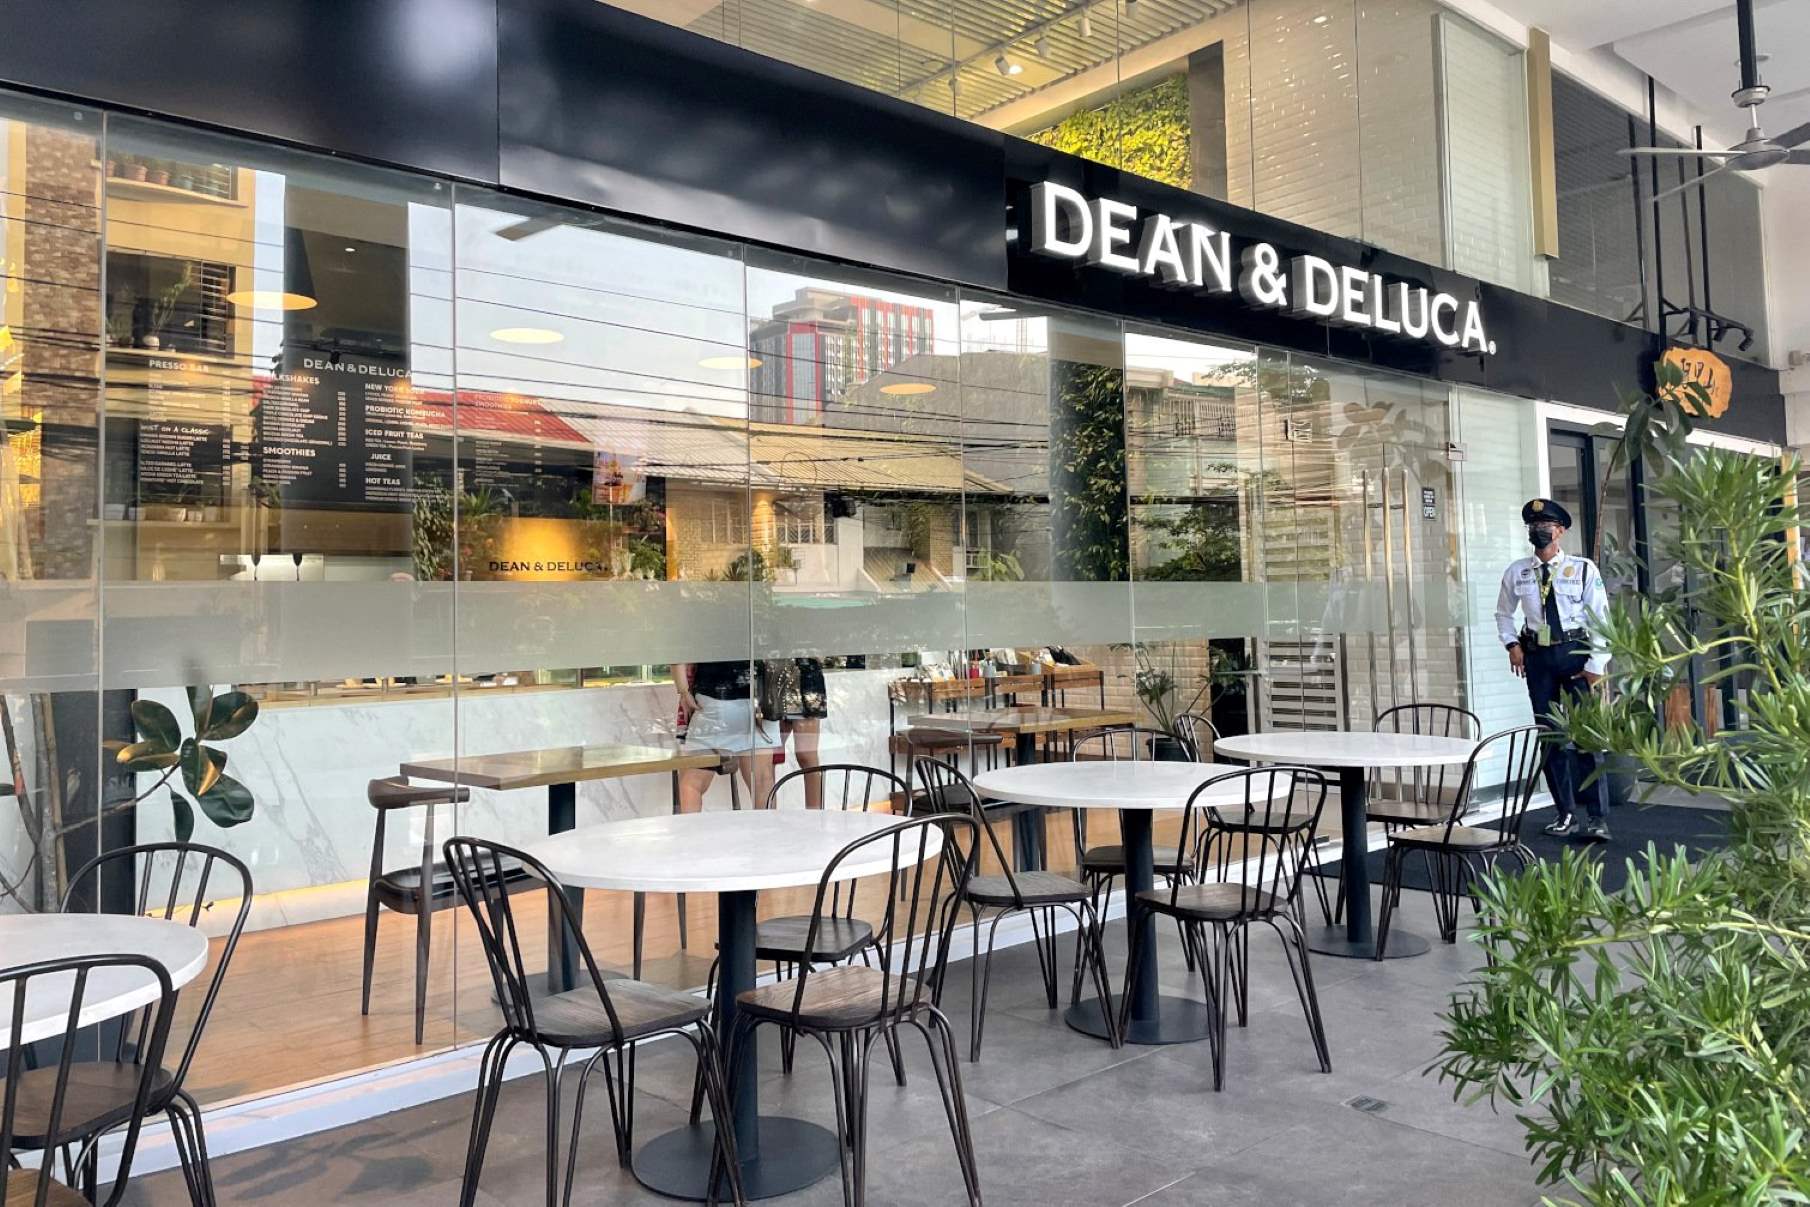 20 Dean And Deluca Nutrition Facts - Facts.net